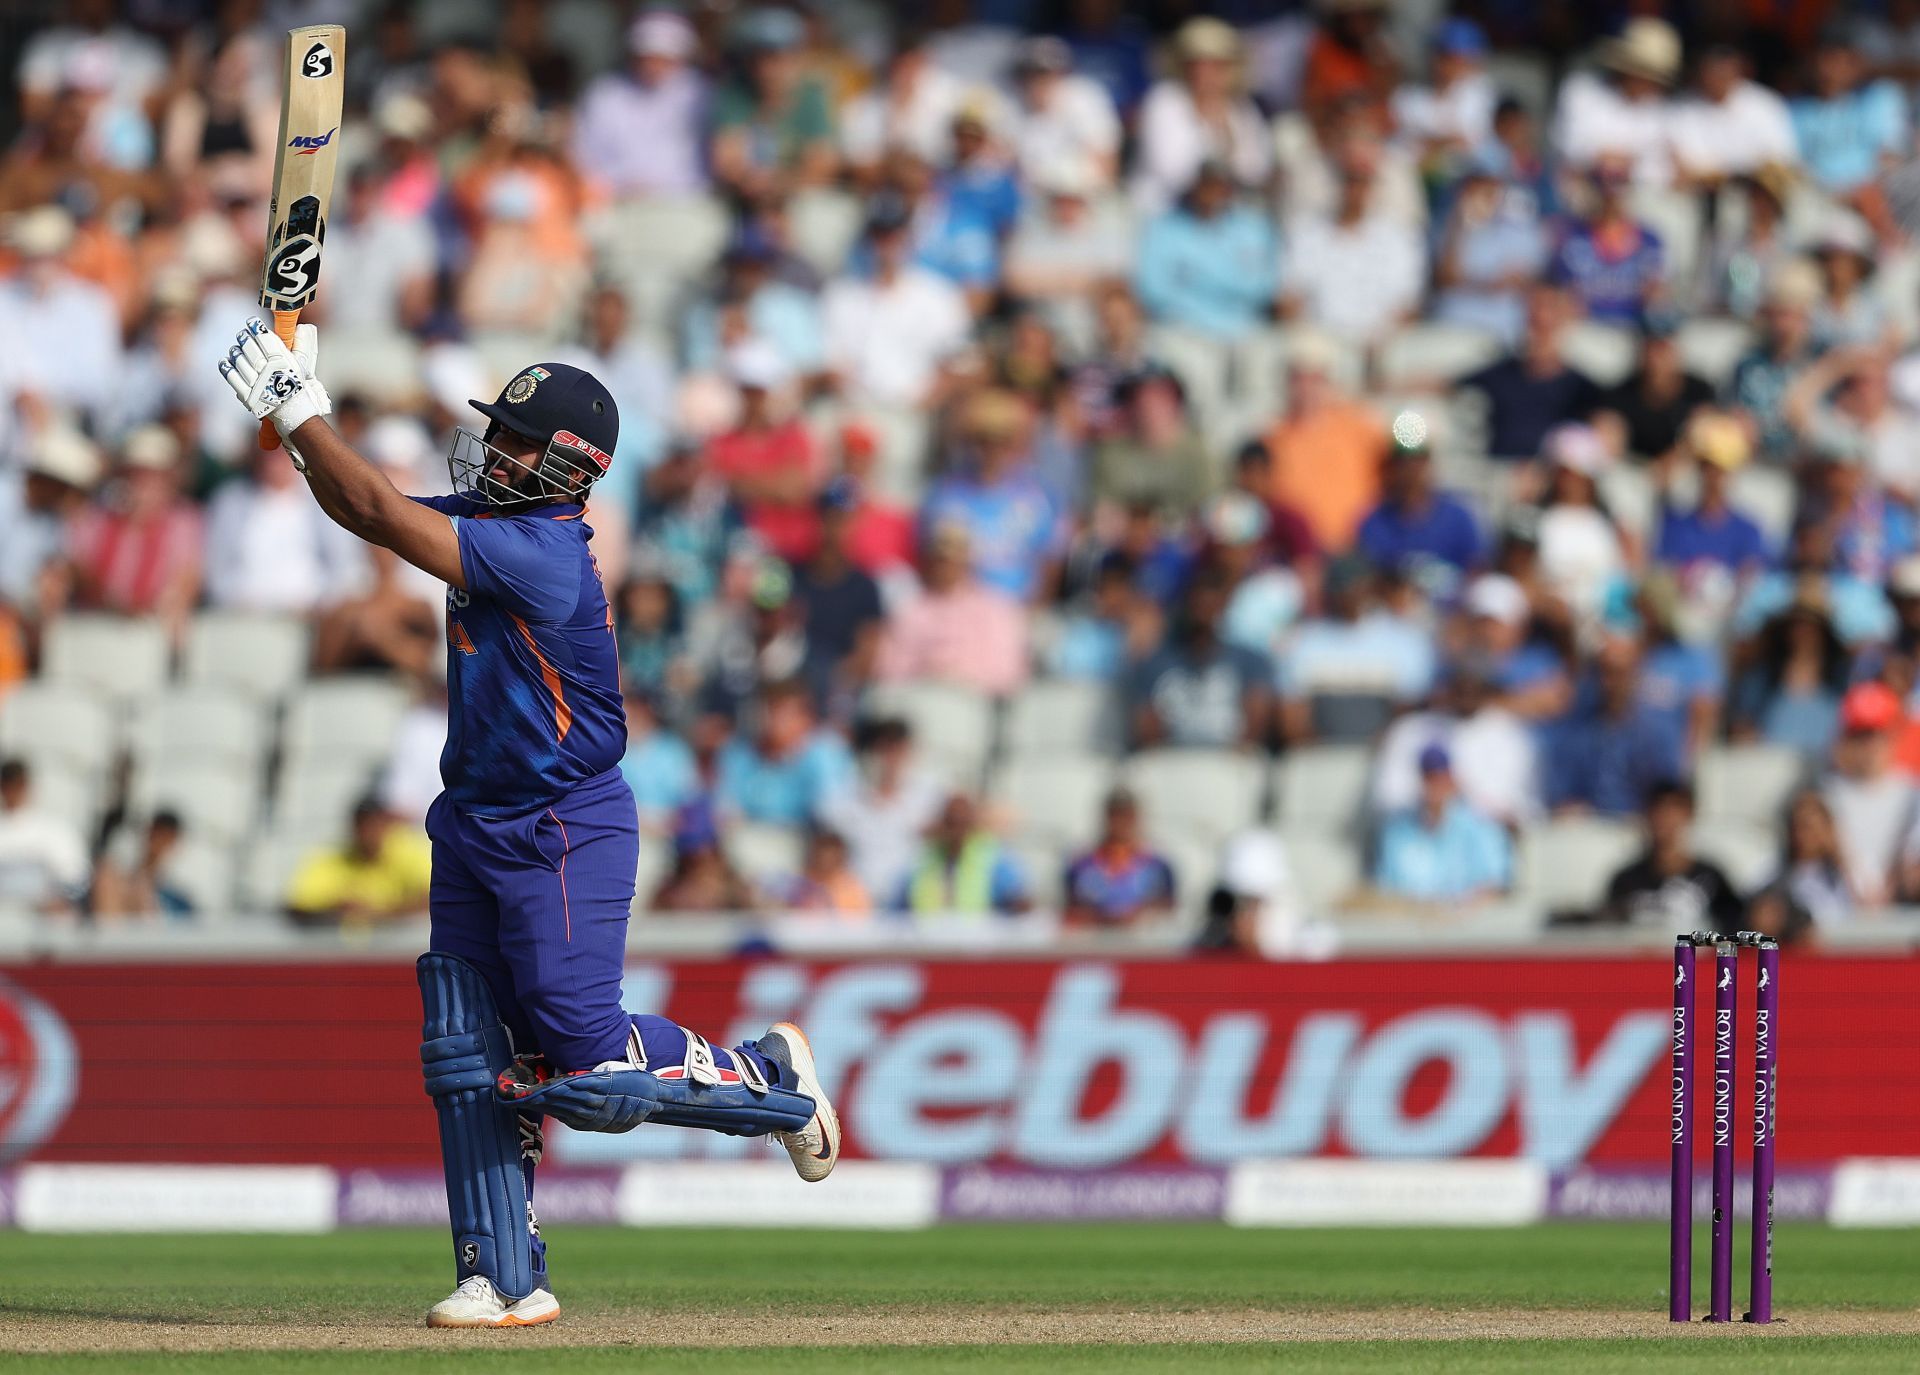 Rishabh Pant tends to play some unconventional shots at times